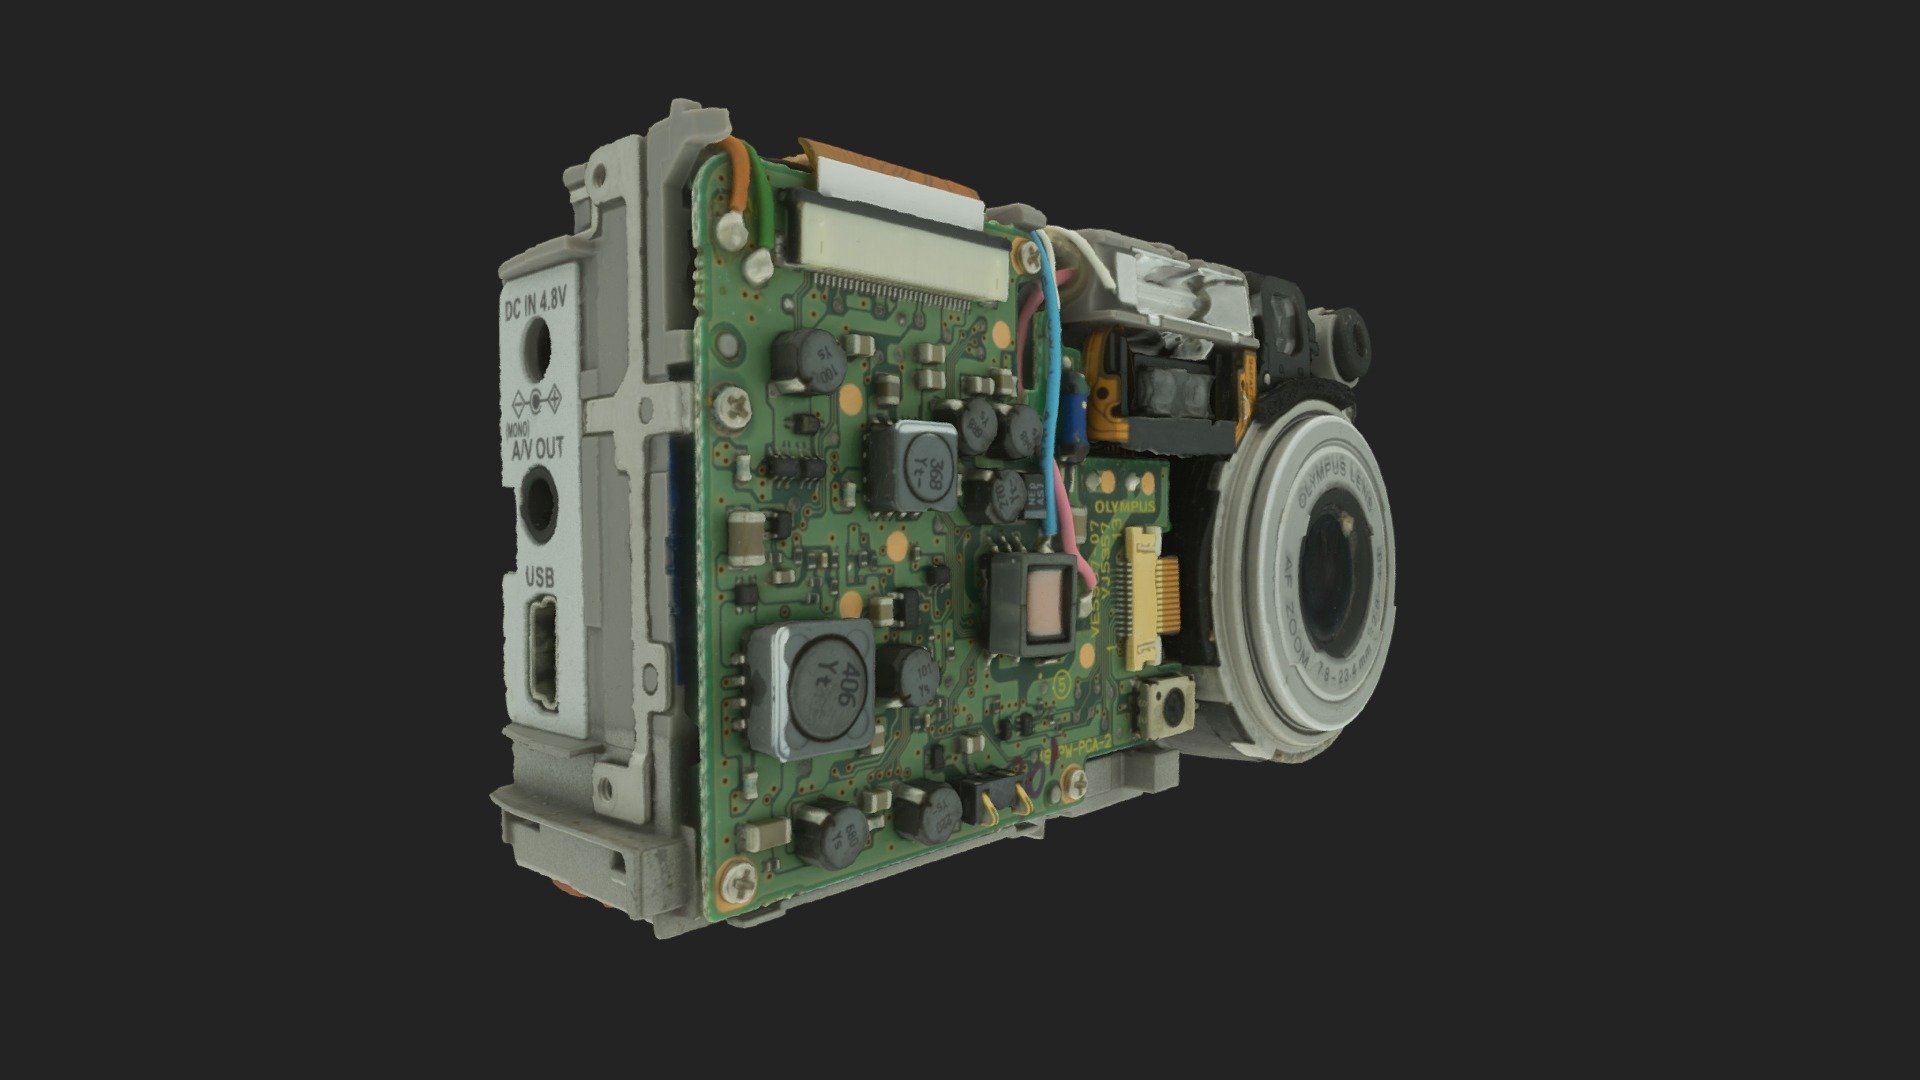 Inner parts of an old Olympus point’n’shoot camera shot with DIY photogrammetry rig.

Created in RealityCapture by Capturing Reality from 934 images in 03h:10m:12s. 15M tri model simplified down to 900k.

Hardware used: Sony A6000 SEL28-70mm @70mm, Nodal Ninja Mecha E1 as a turn table 3d model